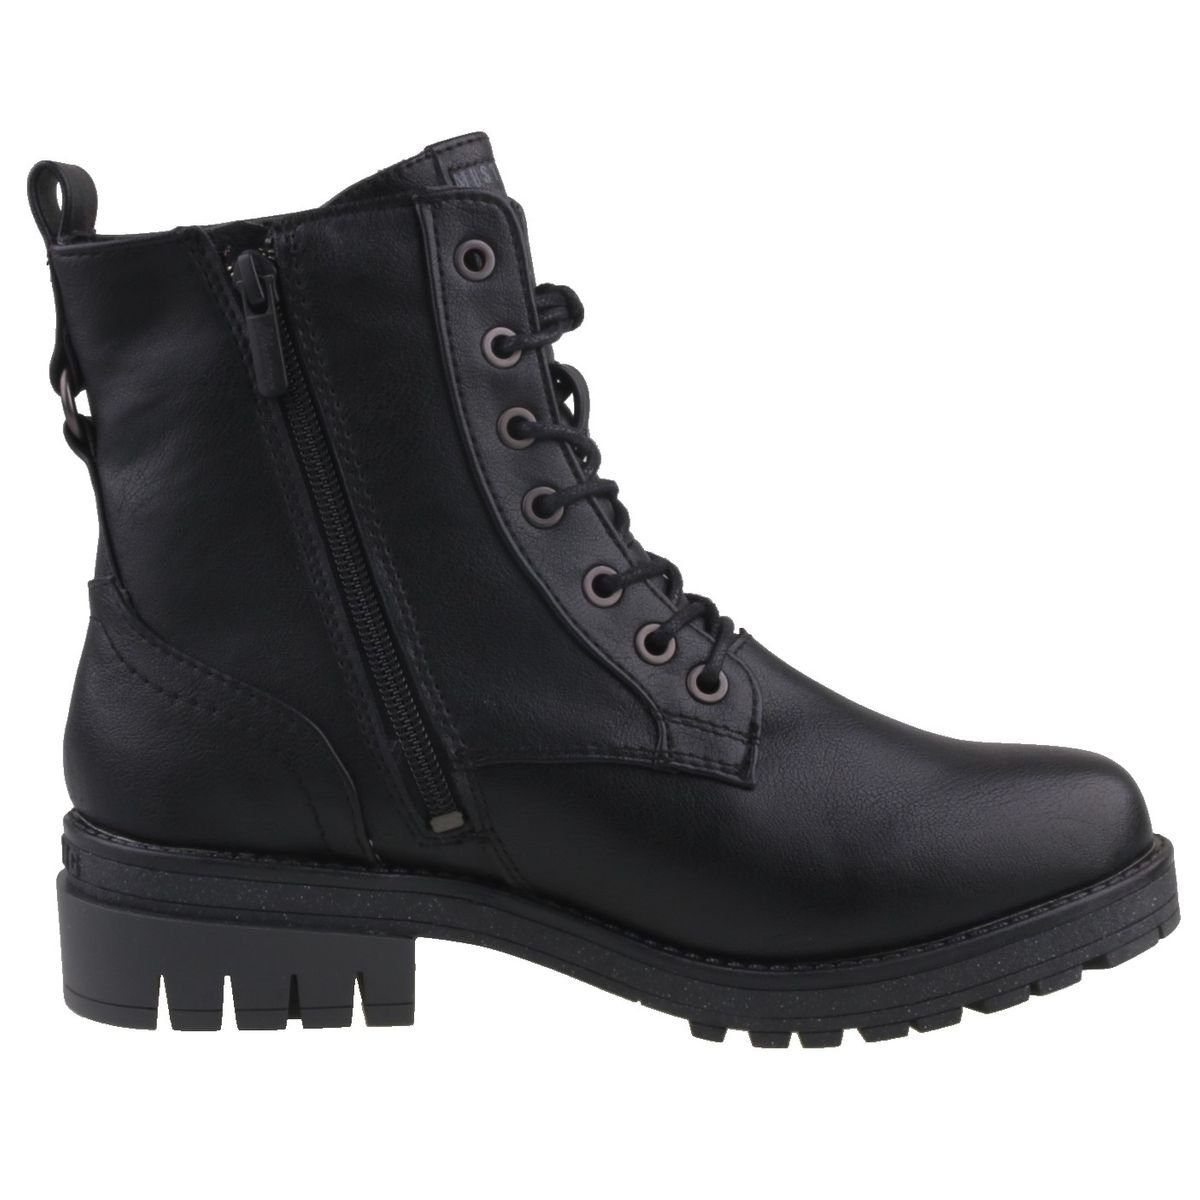 Mustang Shoes 1397603/9 black Stiefelette (13102033)